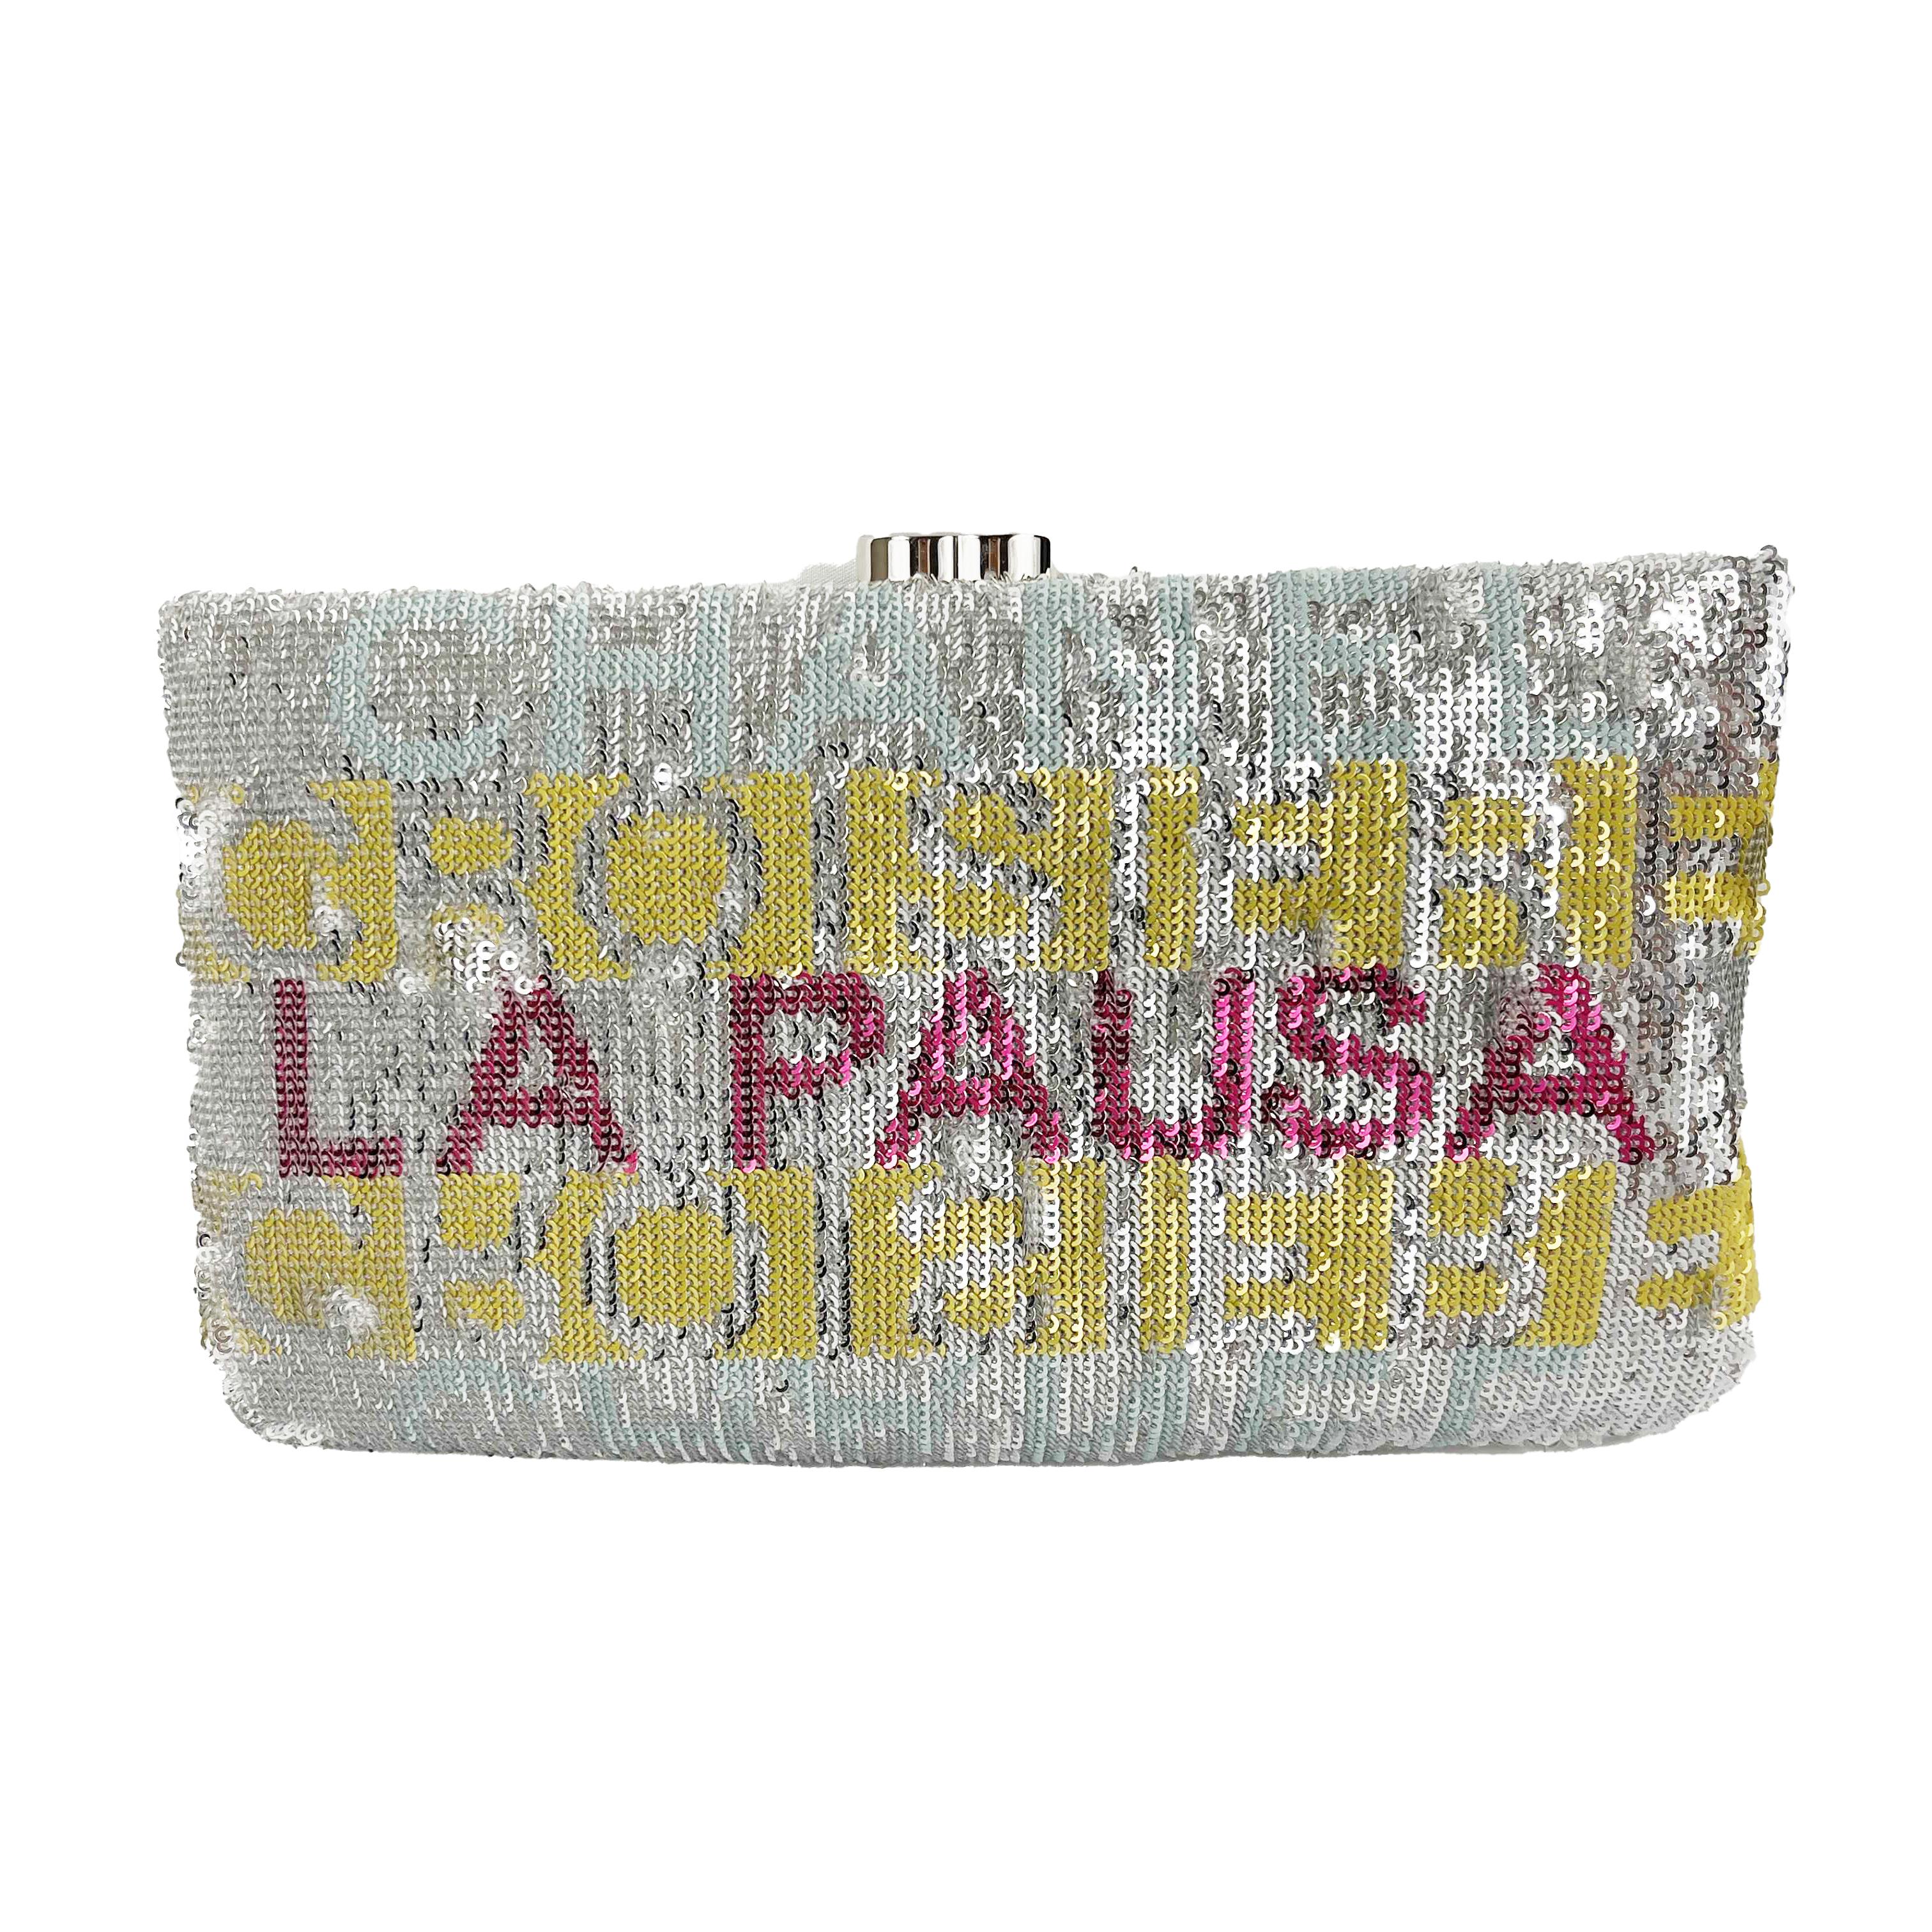 CHANEL - La Pausa Embroidered Satin Sequin Clutch Bag Silver Handbag

Description

Crafted of silver, yellow and pink sequins.
Silver Hardware
Details in silver metal, three compartments, one flat pocket.
The clutch opens to a white satin